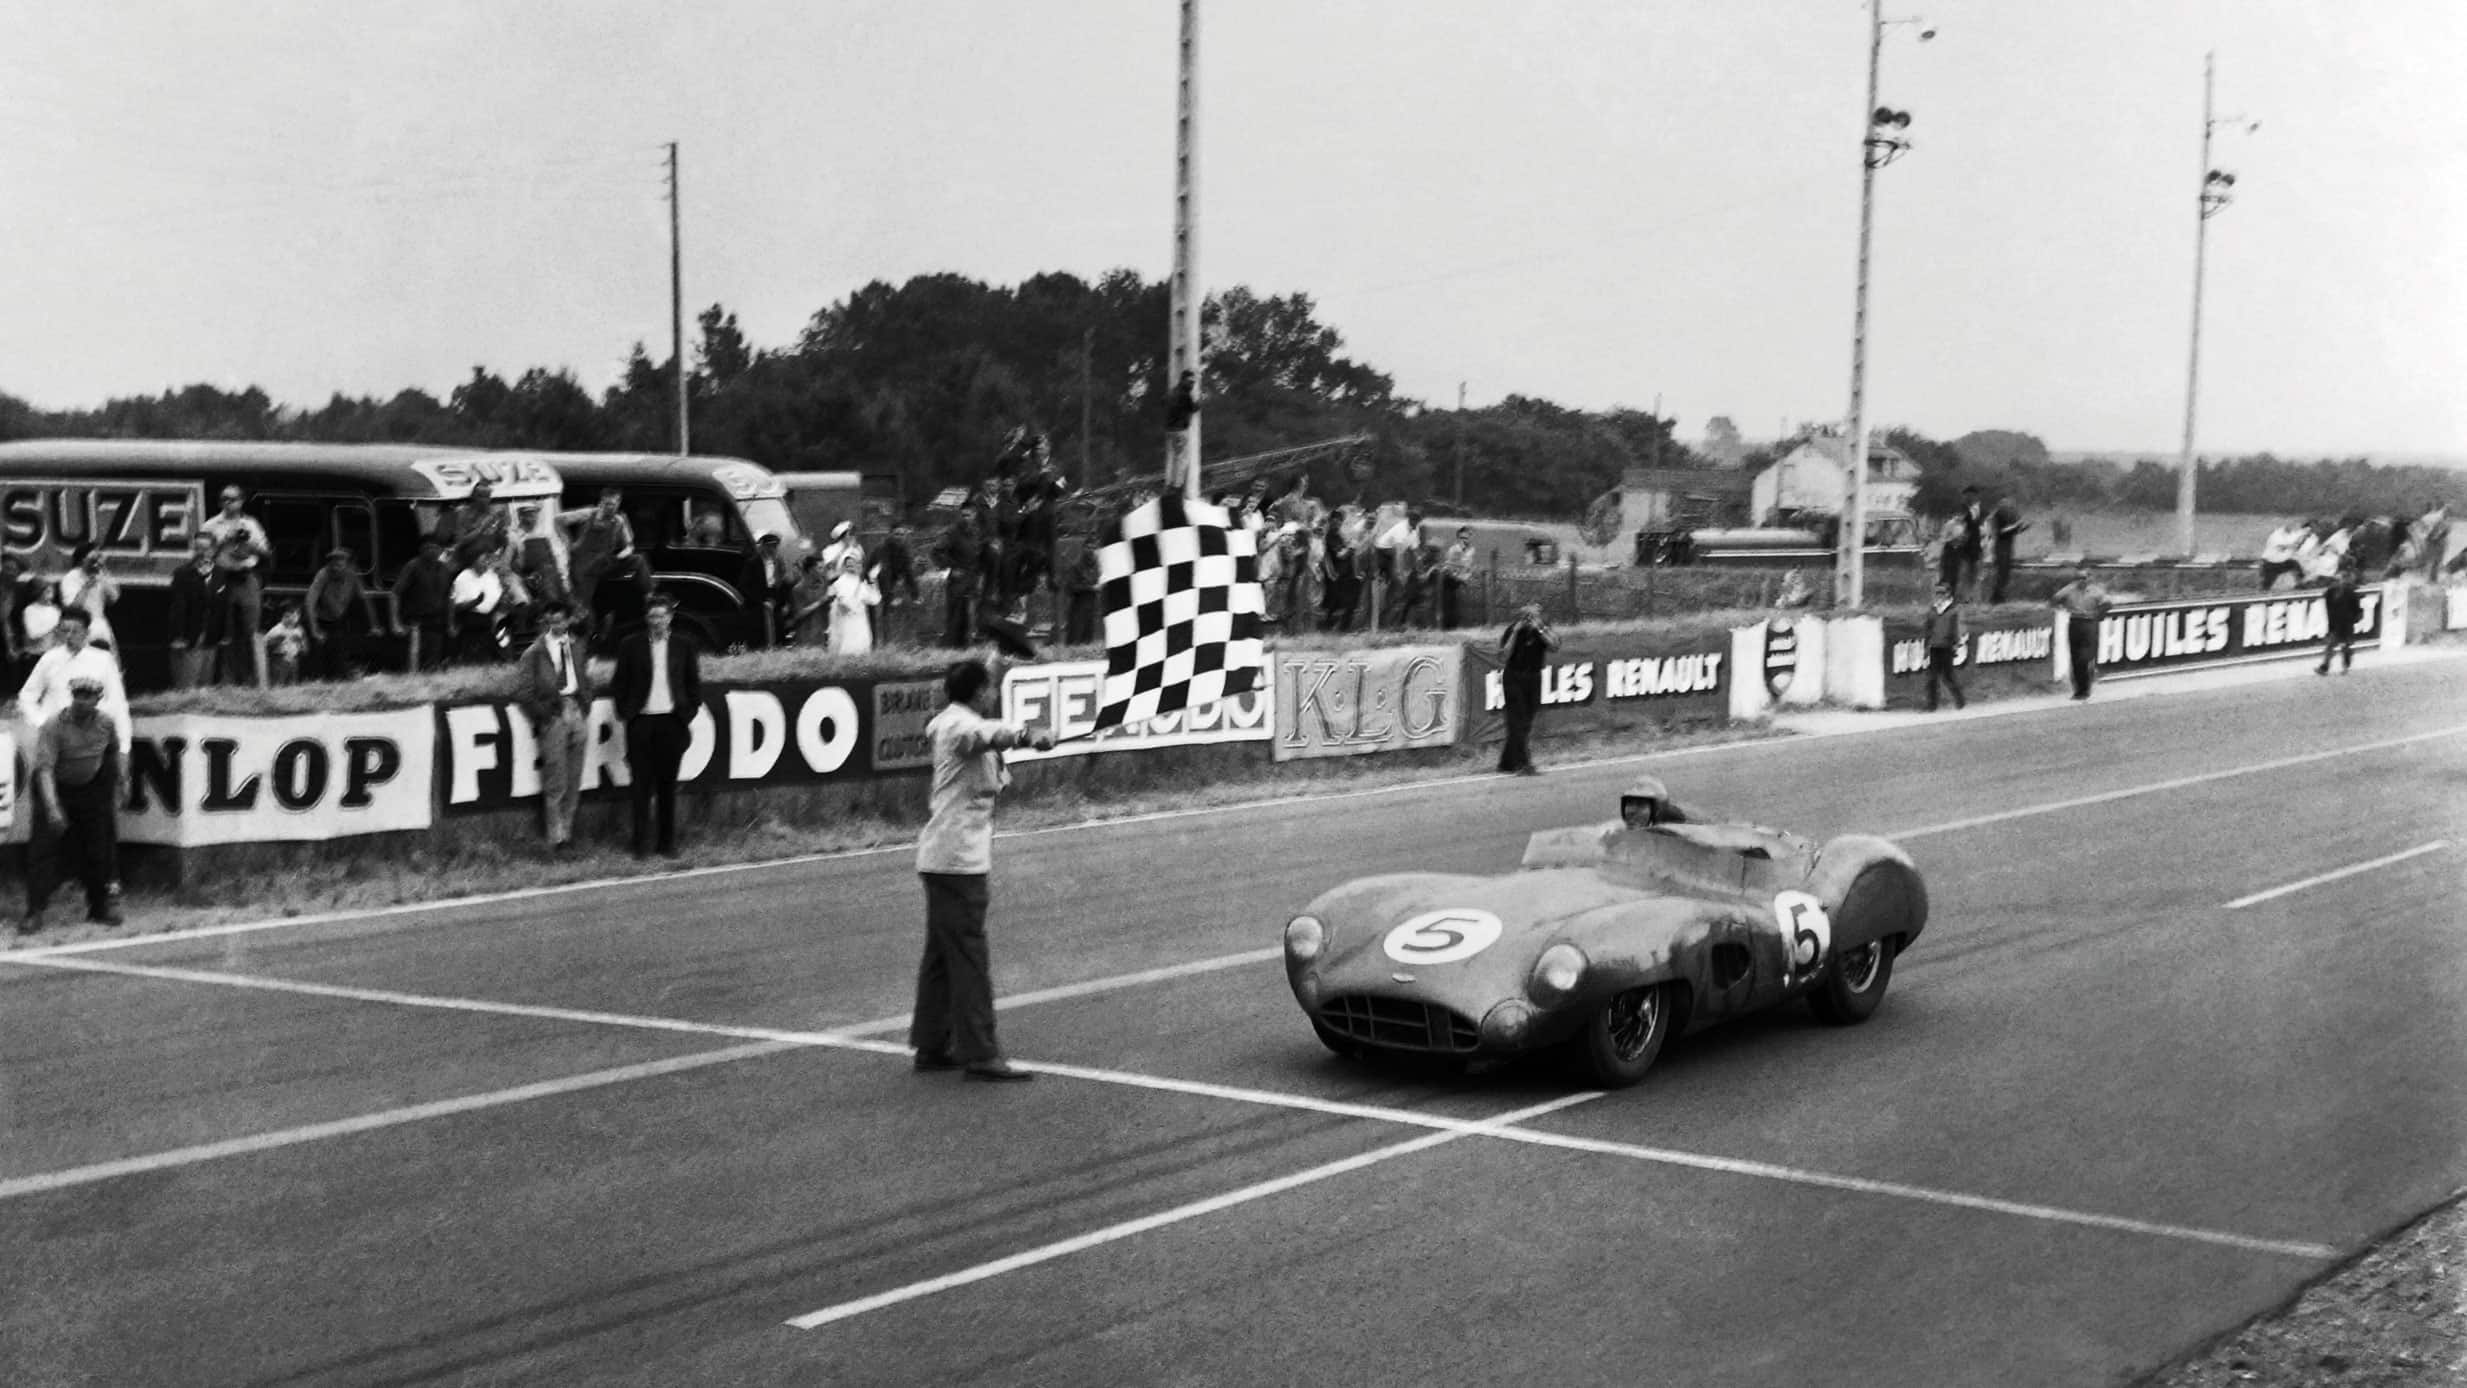 Aston Martin DBR1 crossing the line at Le Mans 1959